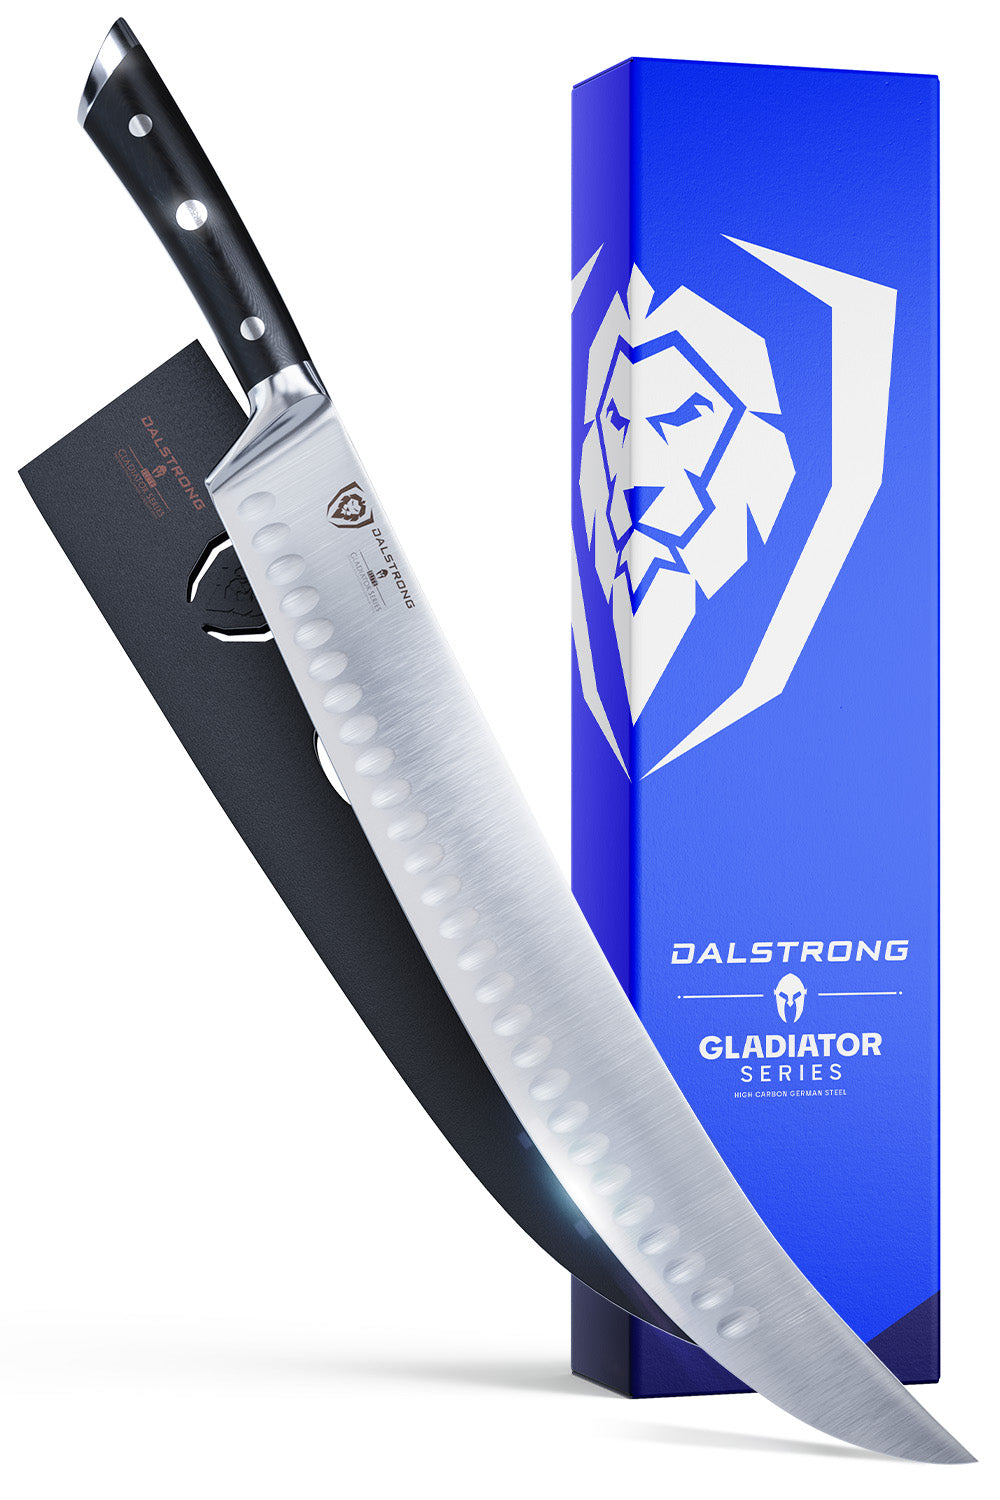 Dalstrong gladiator series 14 inch butcher knife with black handle in front of it's premium packaging.